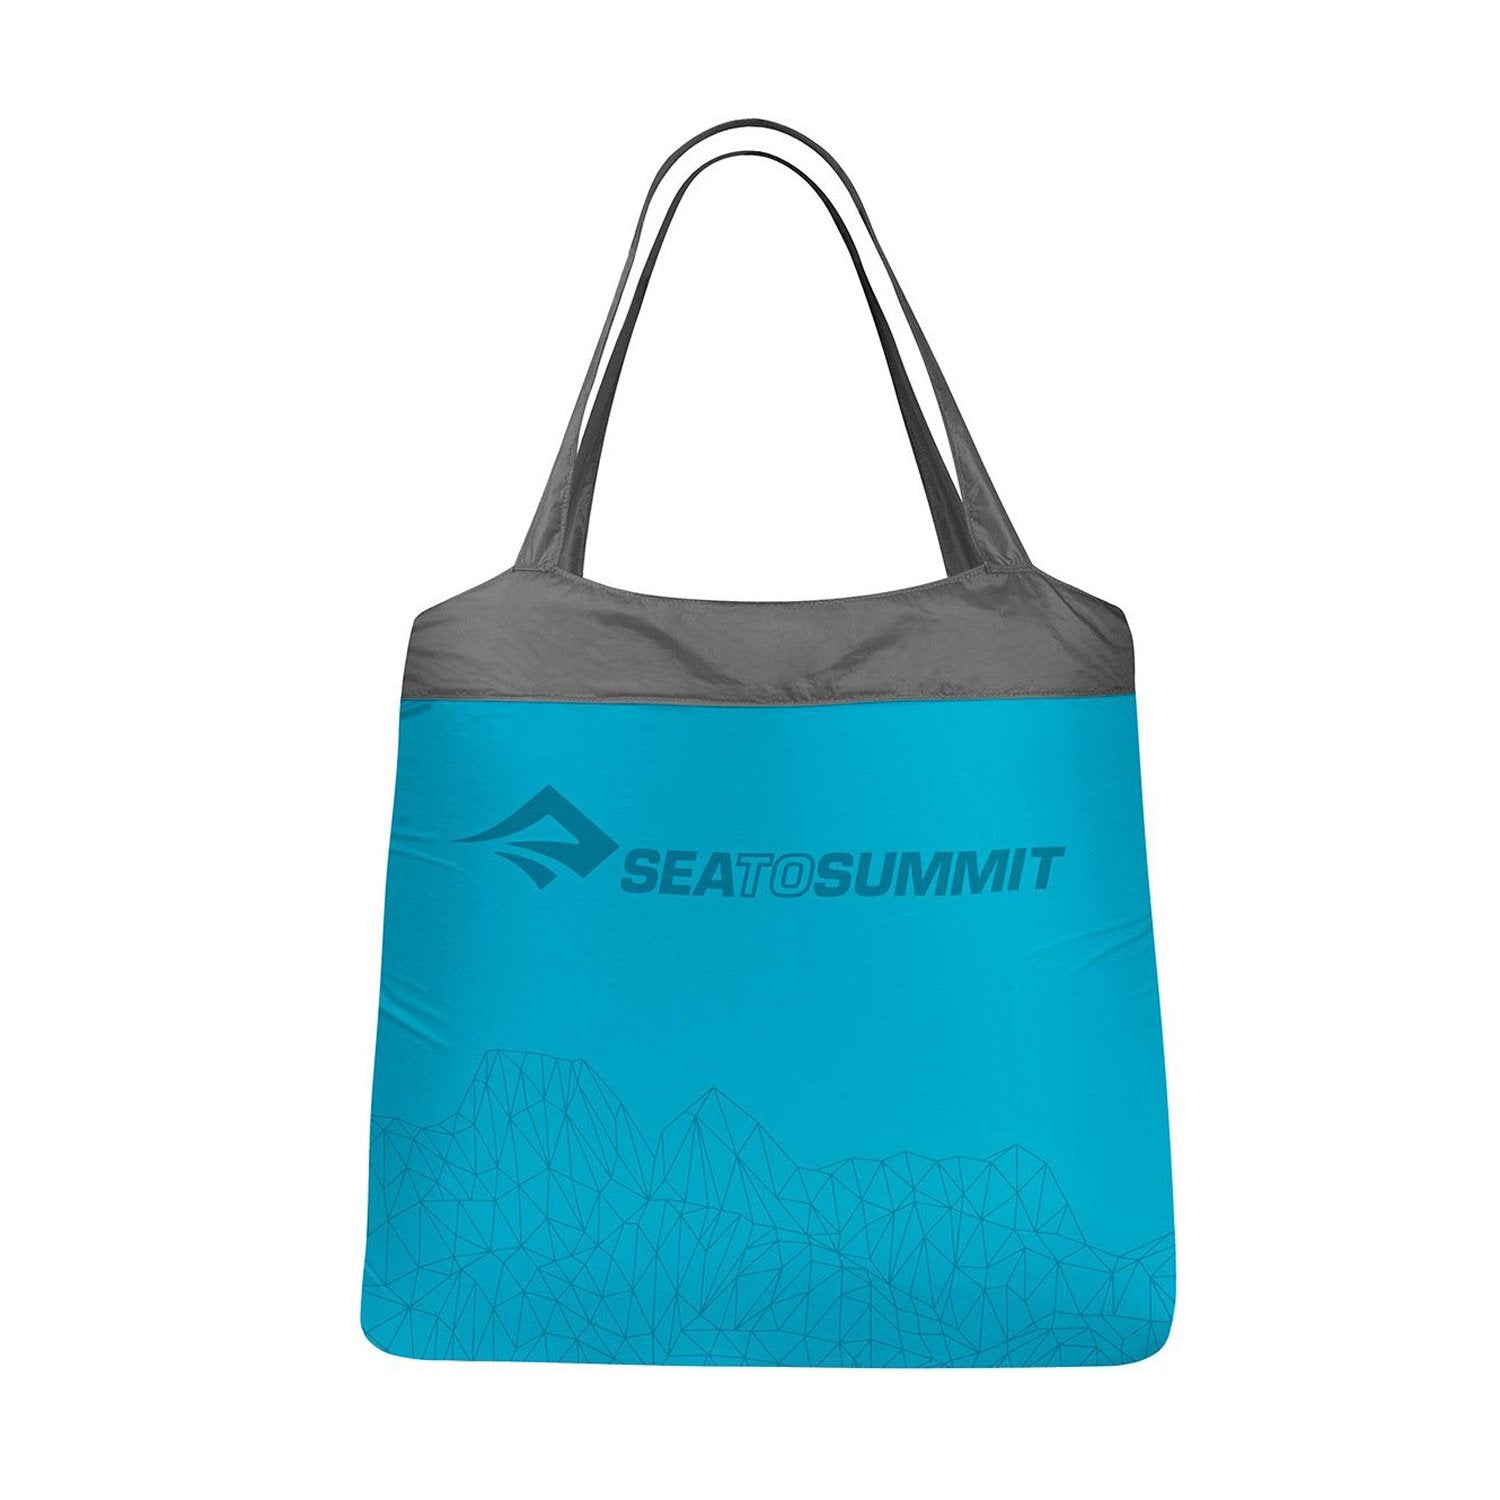 Sea To Summit Ultra Sil Nano 25L Shopping Bag Bags, Packs and Cases Sea To Summit Teal Tactical Gear Supplier Tactical Distributors Australia